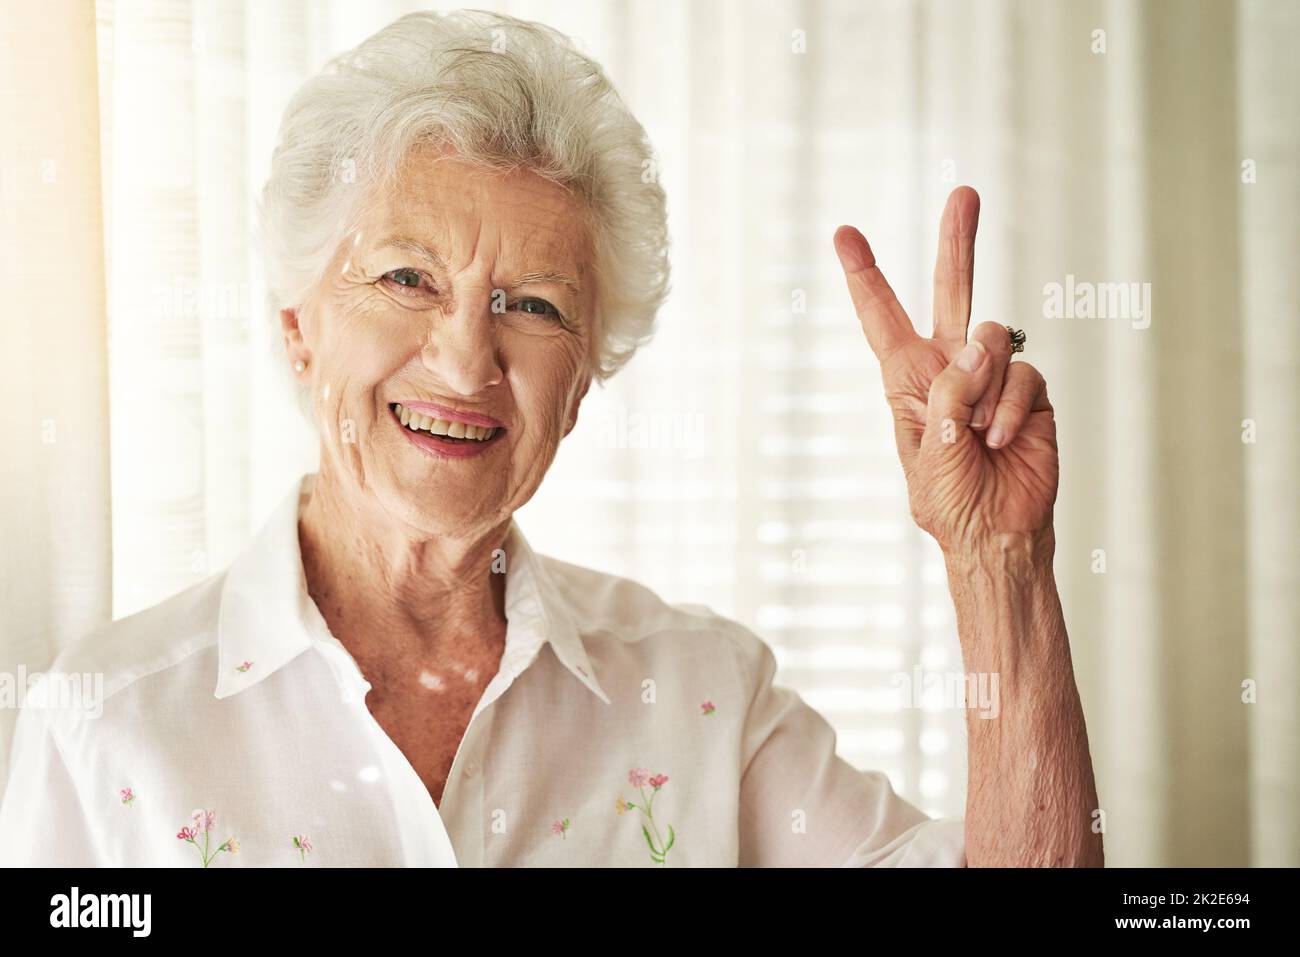 V for vitality. Portrait of a happy elderly woman showing a peace gesture at home. Stock Photo